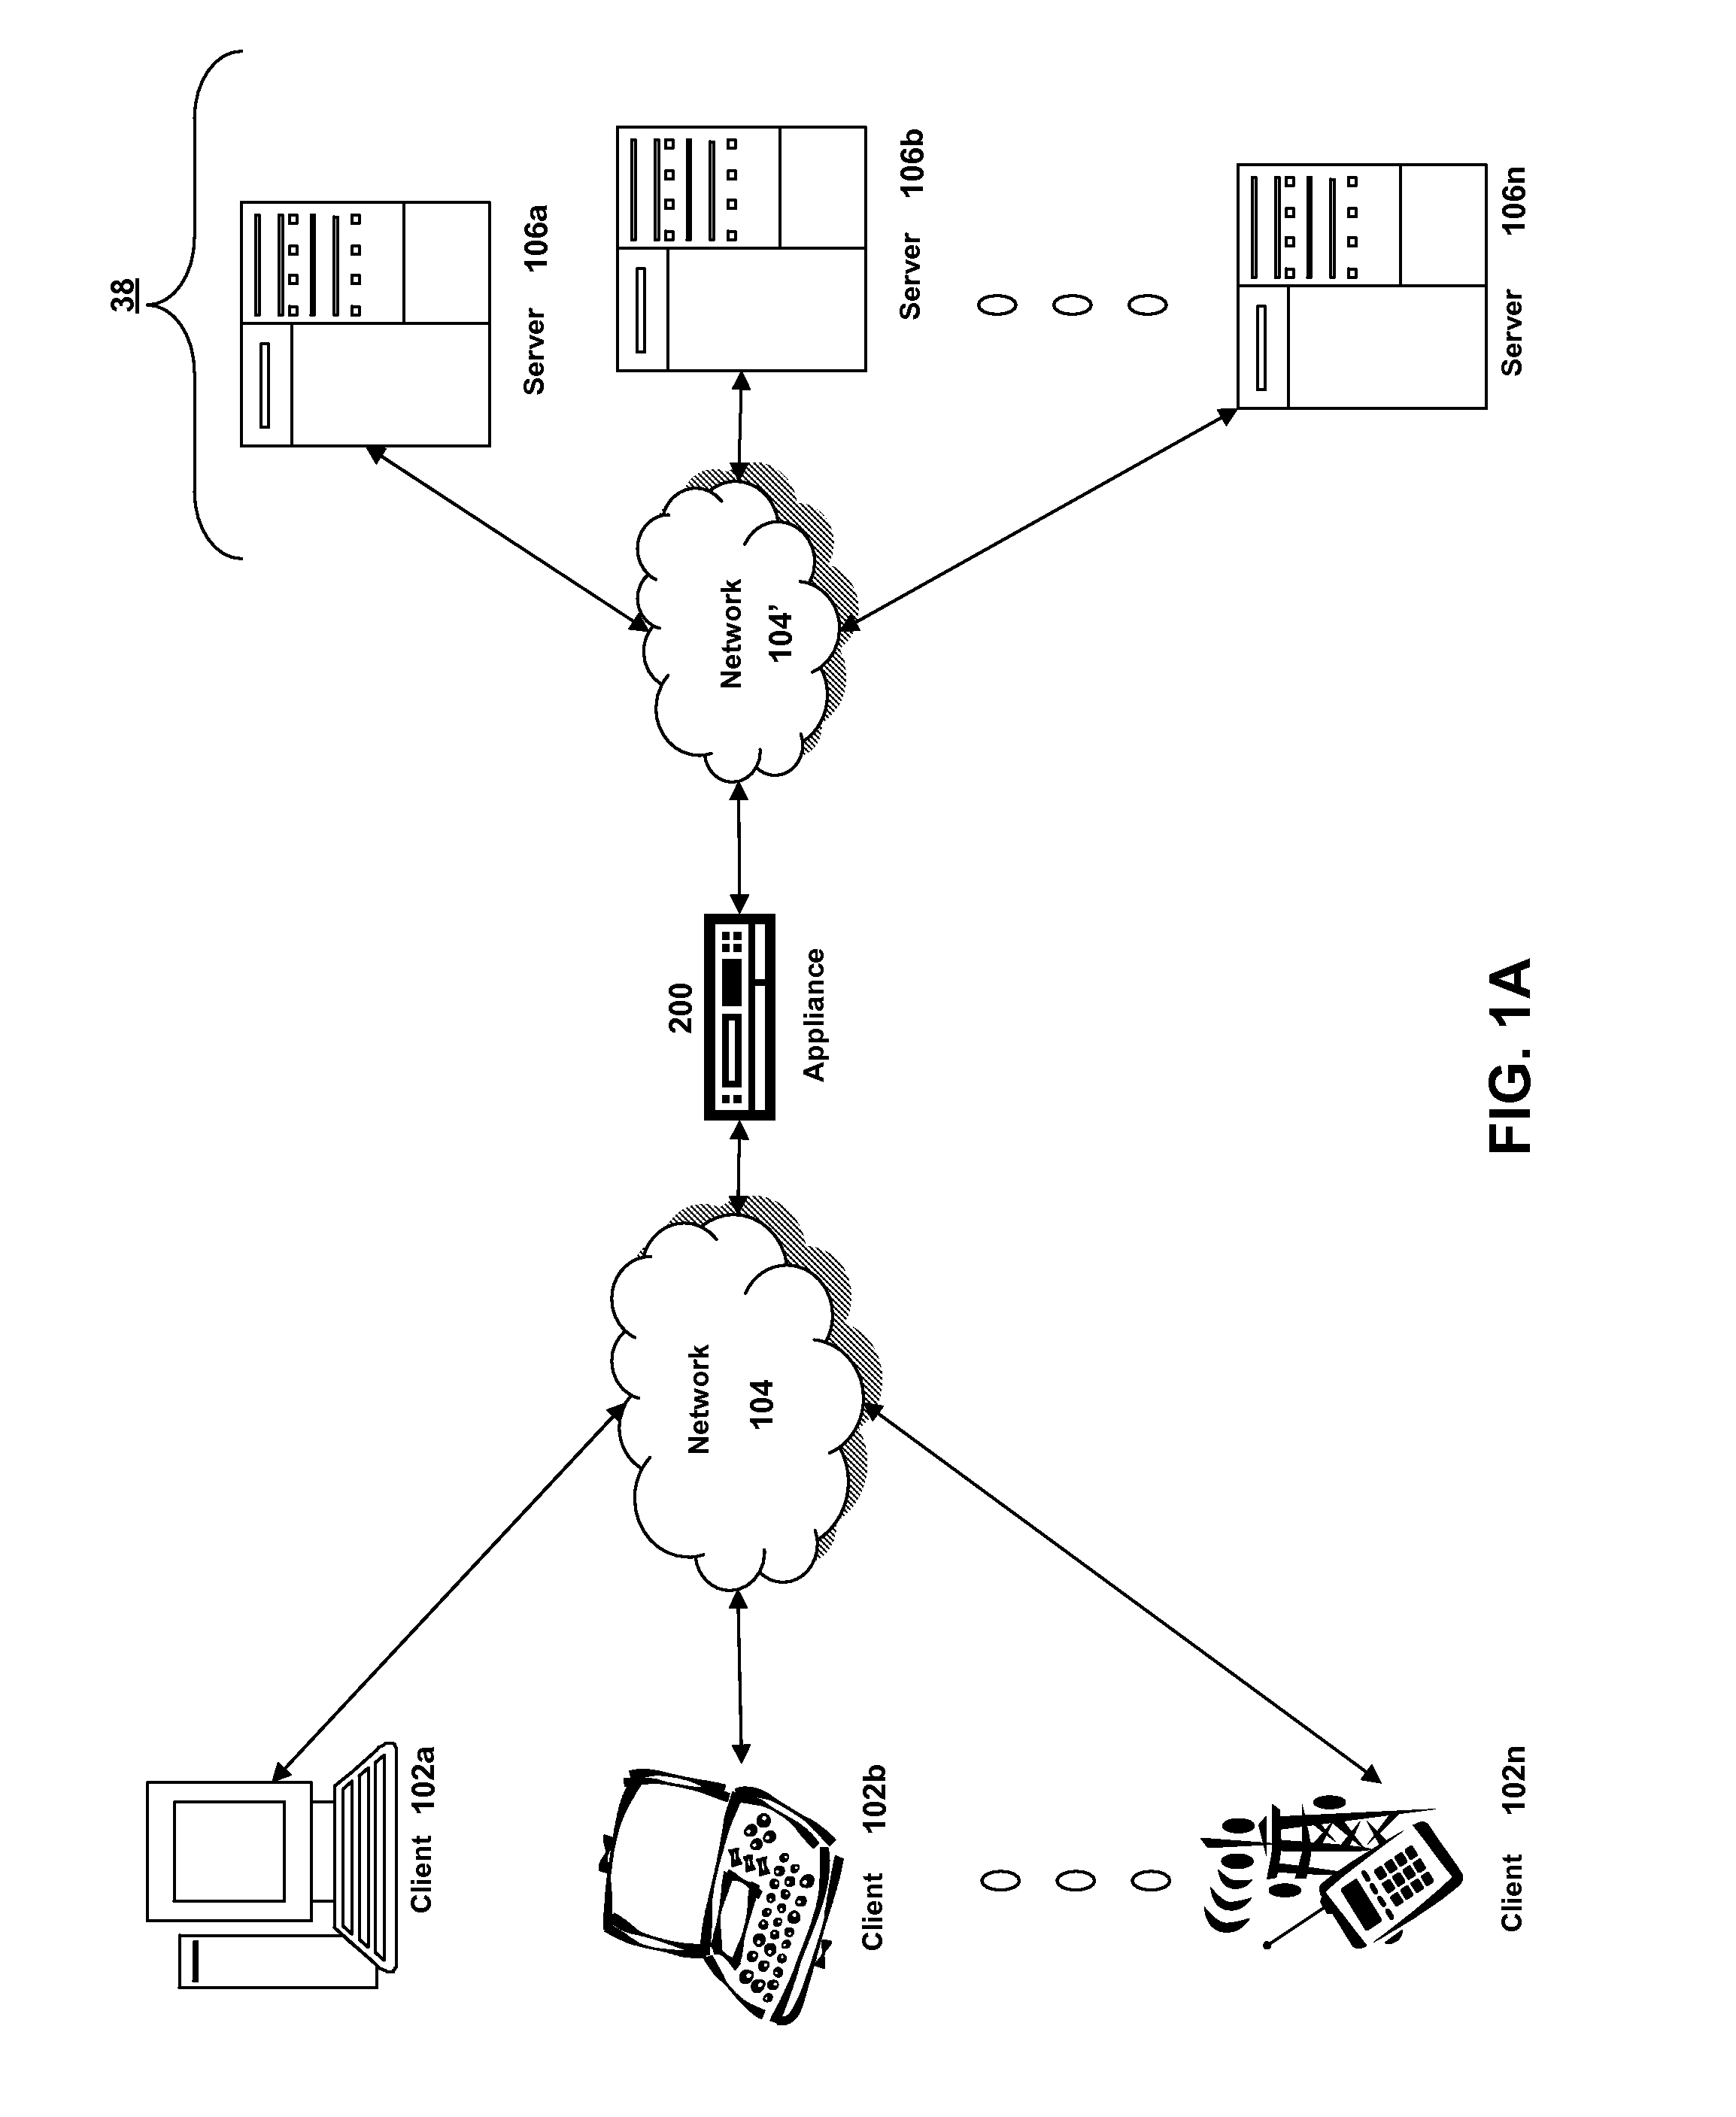 Systems and Methods for Providing Global Server Load Balancing of Heterogeneous Devices